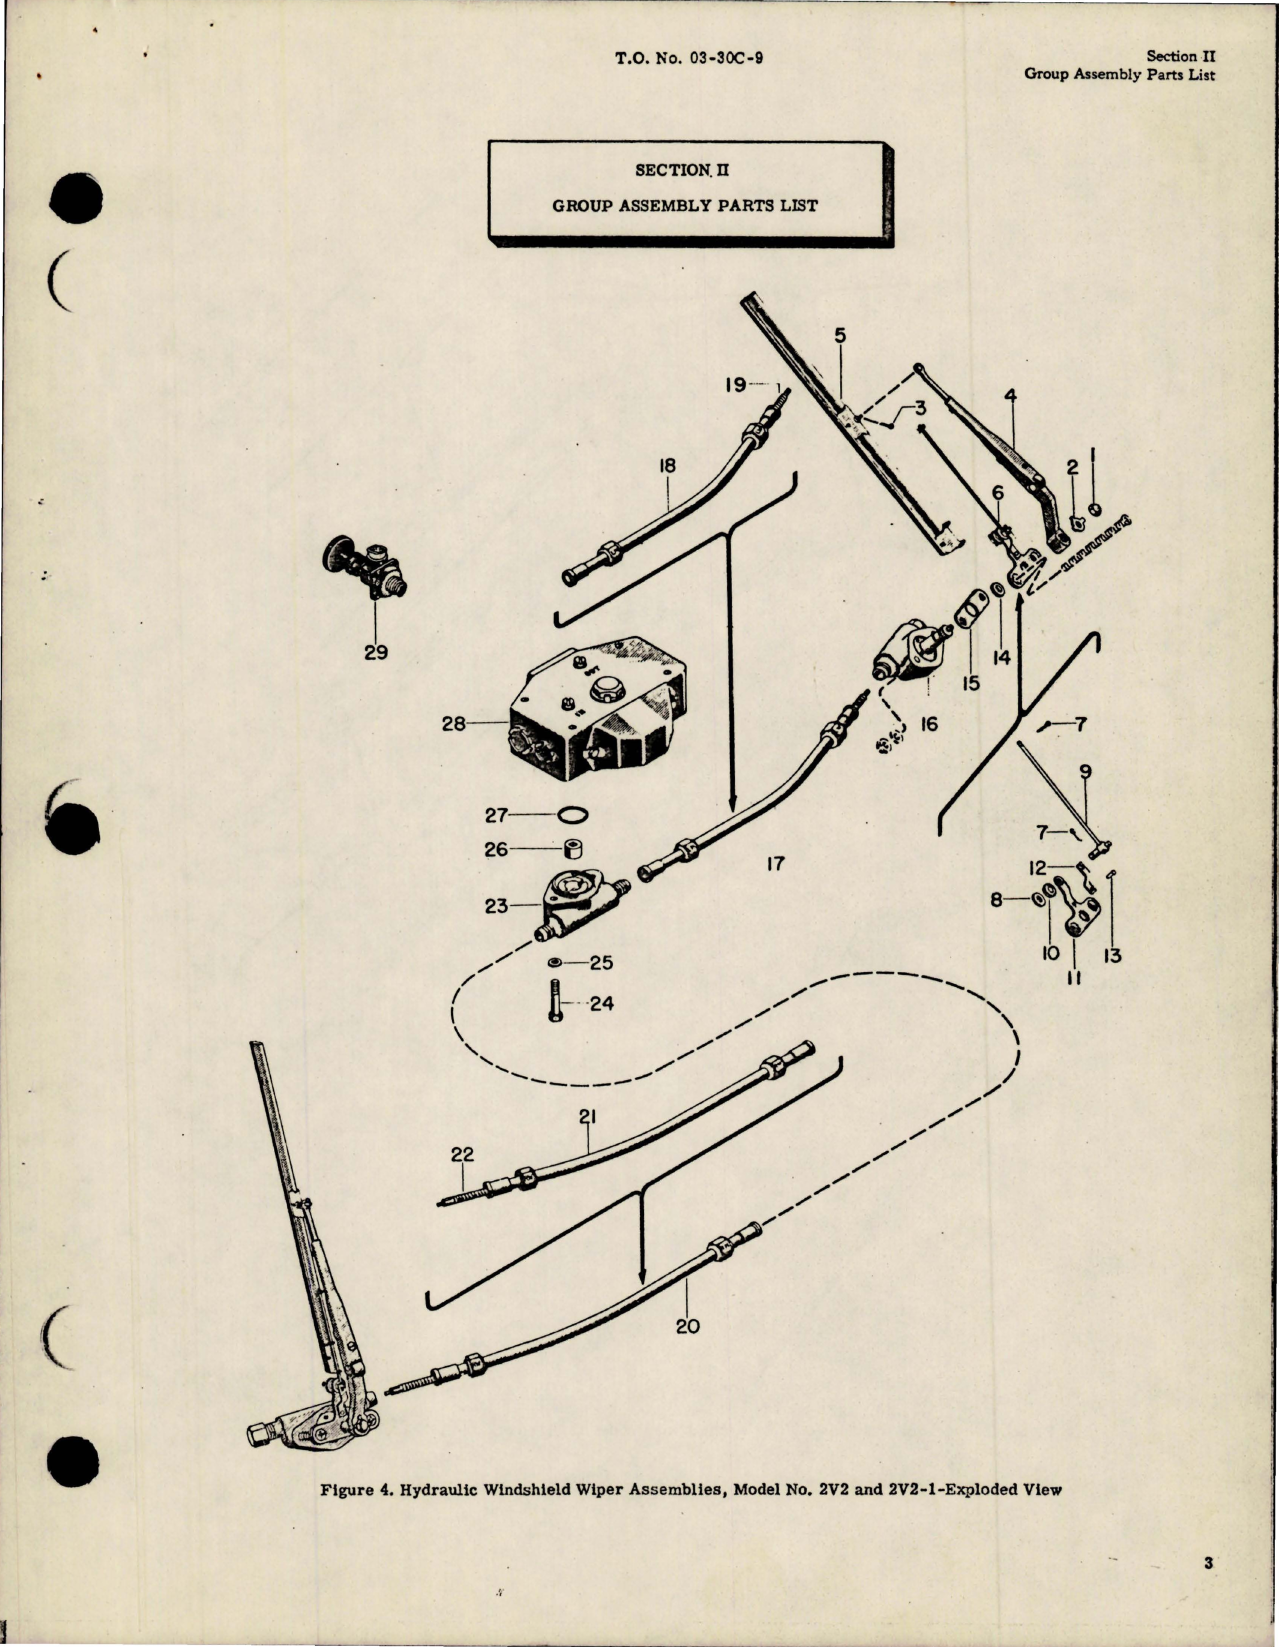 Sample page 9 from AirCorps Library document: Parts Catalog for Hydraulic Windshield Wipers 